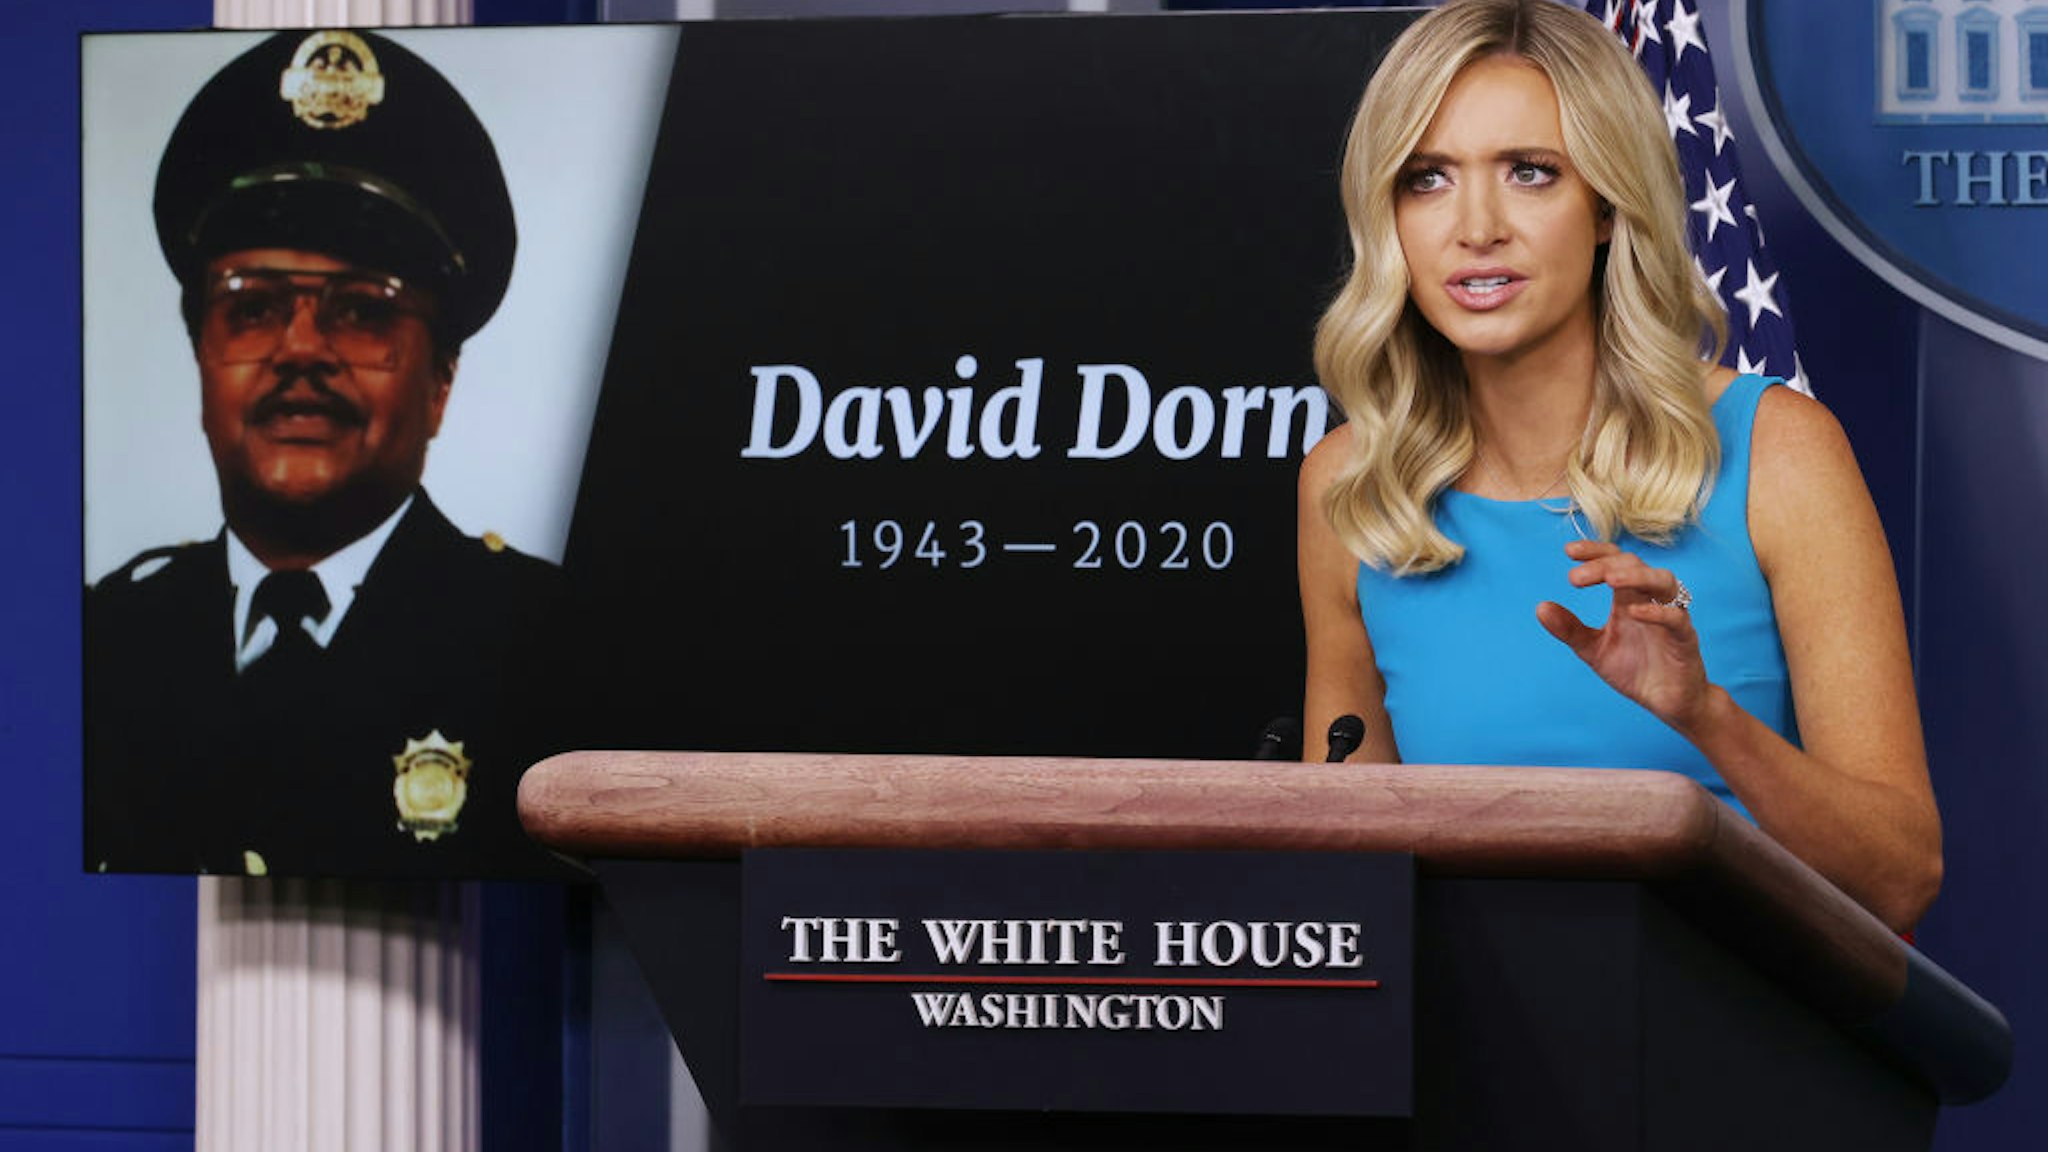 WASHINGTON, DC - JUNE 03: White House Press Secretary Kayleigh McEnany notes the deaths of several police officers during a news conference, including retired St. Louis Police Captain David Dorn, in the Brady Press Briefing Room at the White House June 03, 2020 in Washington, DC. Earlier in the day, Defense Secretary Mark Esper broke with President Donald Trump and said that he does not support using active duty military troops on the streets of American cities to quell protests over the death of George Floyd, who was killed while in the custody of Minneapolis police on Memorial Day. (Photo by Chip Somodevilla/Getty Images)